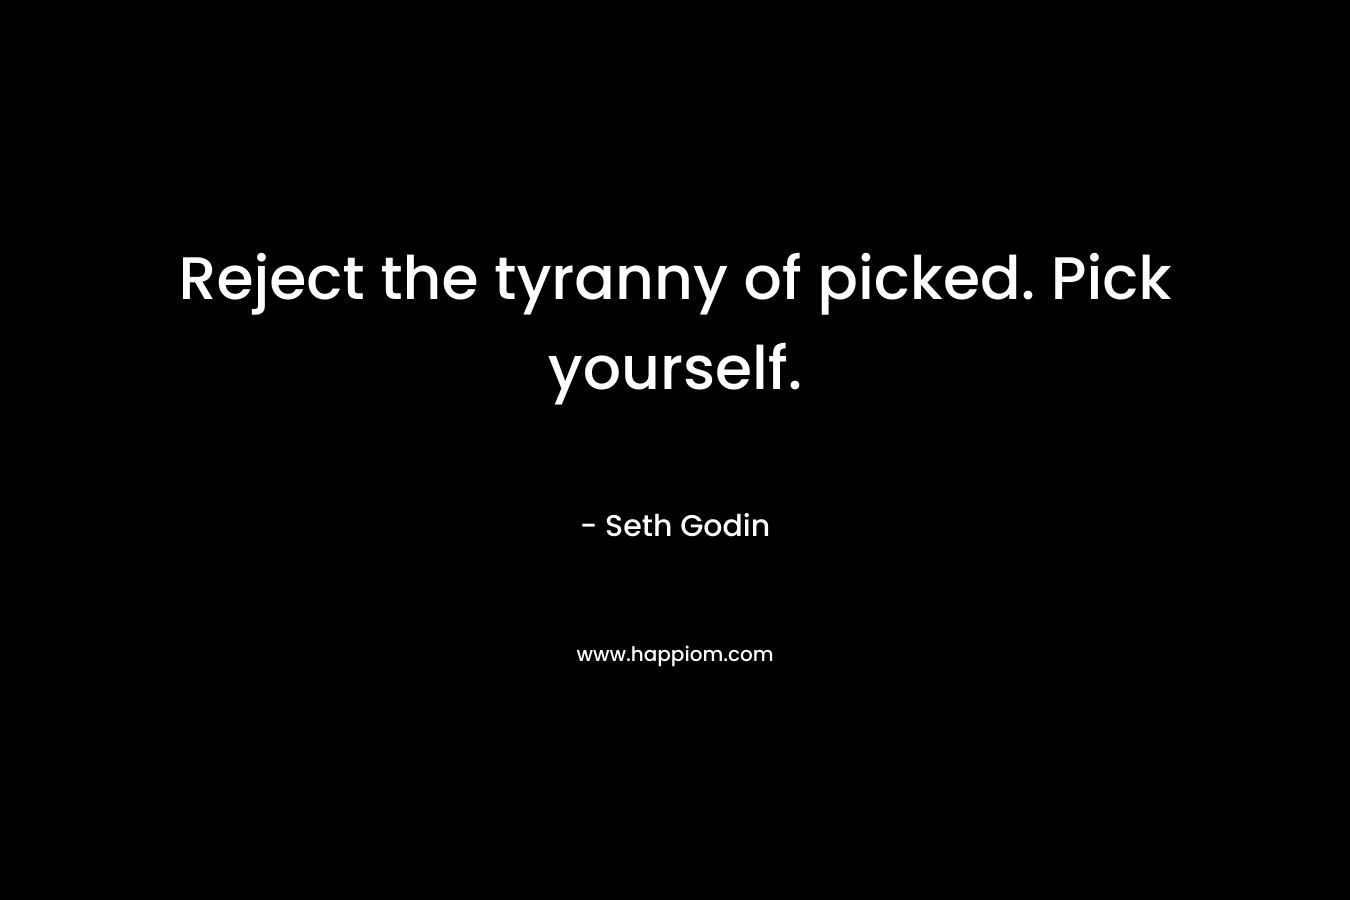 Reject the tyranny of picked. Pick yourself. – Seth Godin